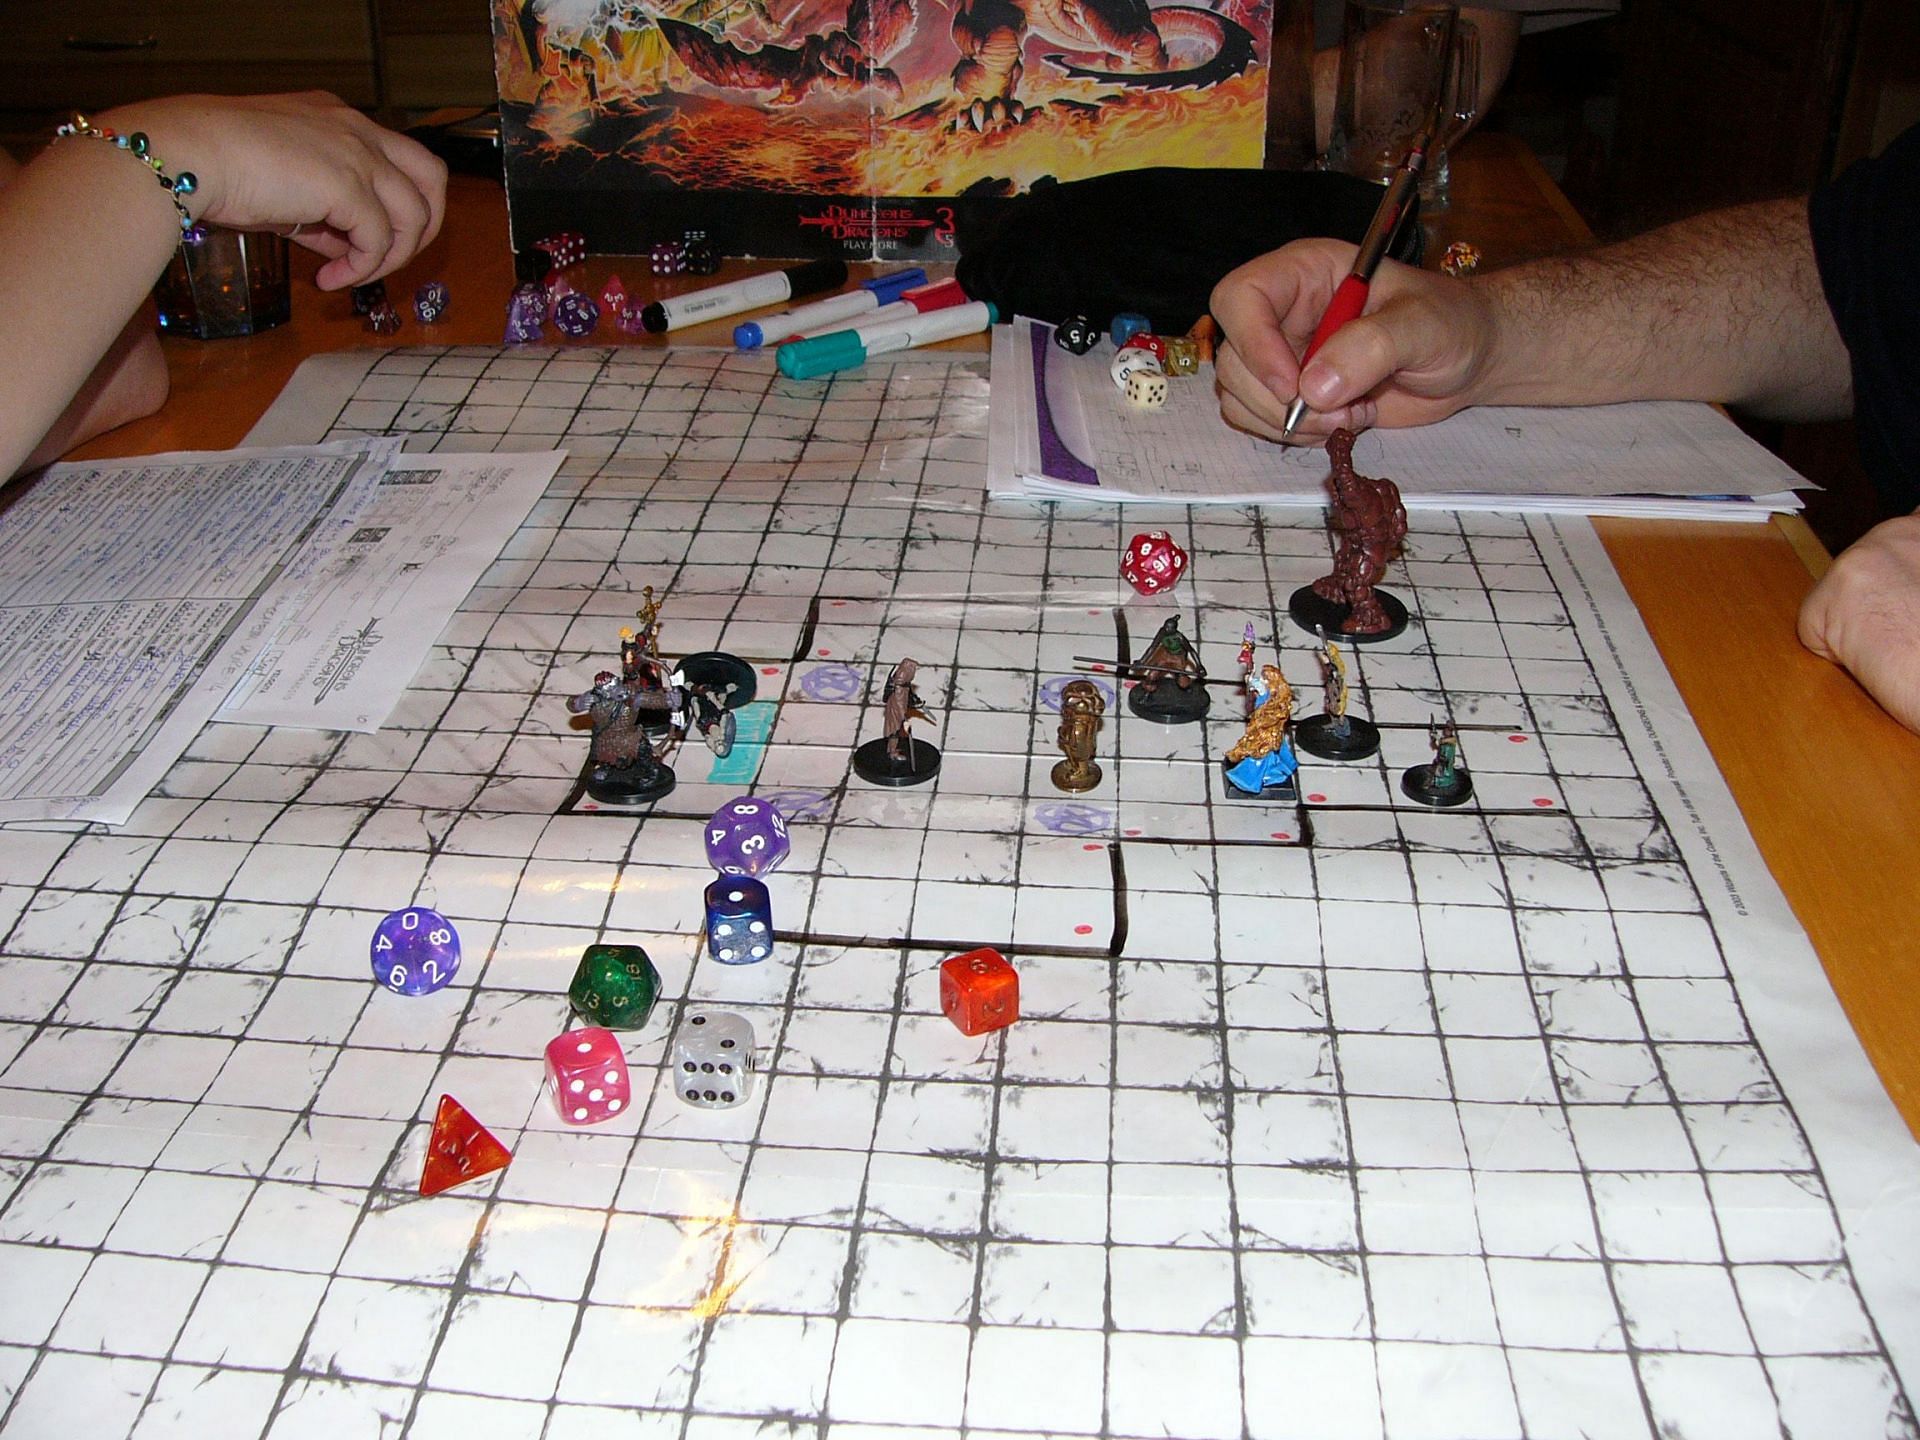 DnD being played